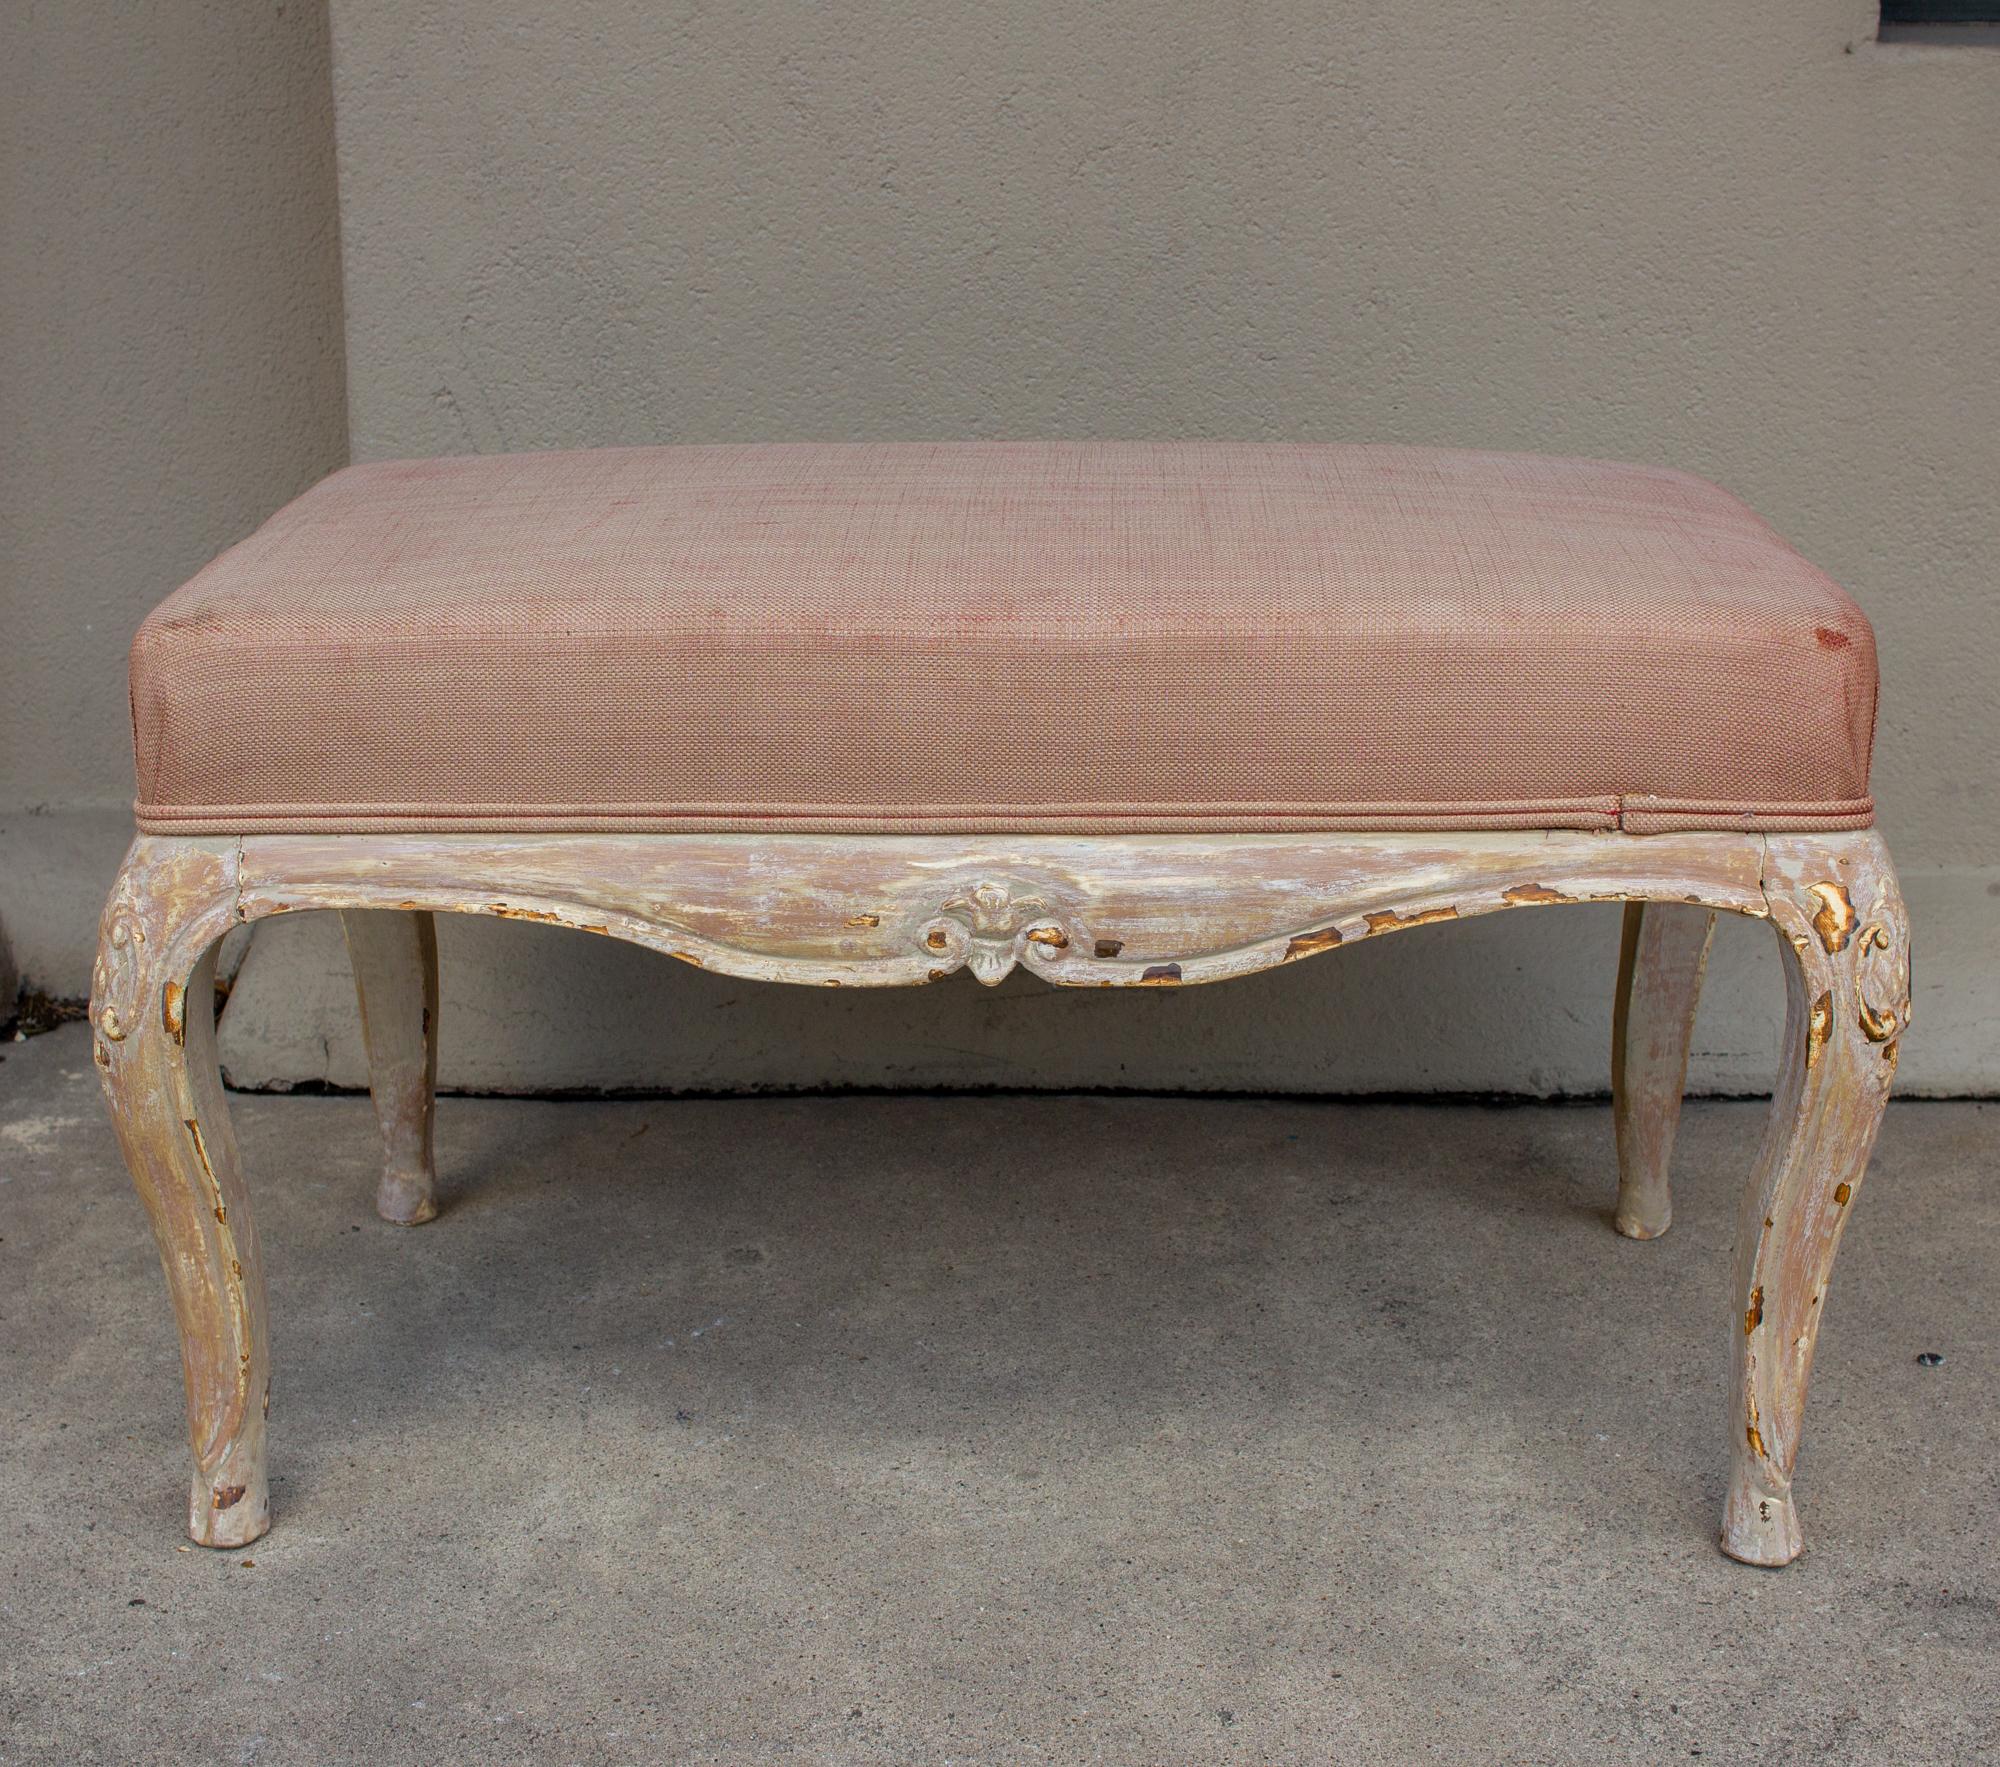 Antique French Carved Bench with Distressed Painted Finish, circa 1820 2